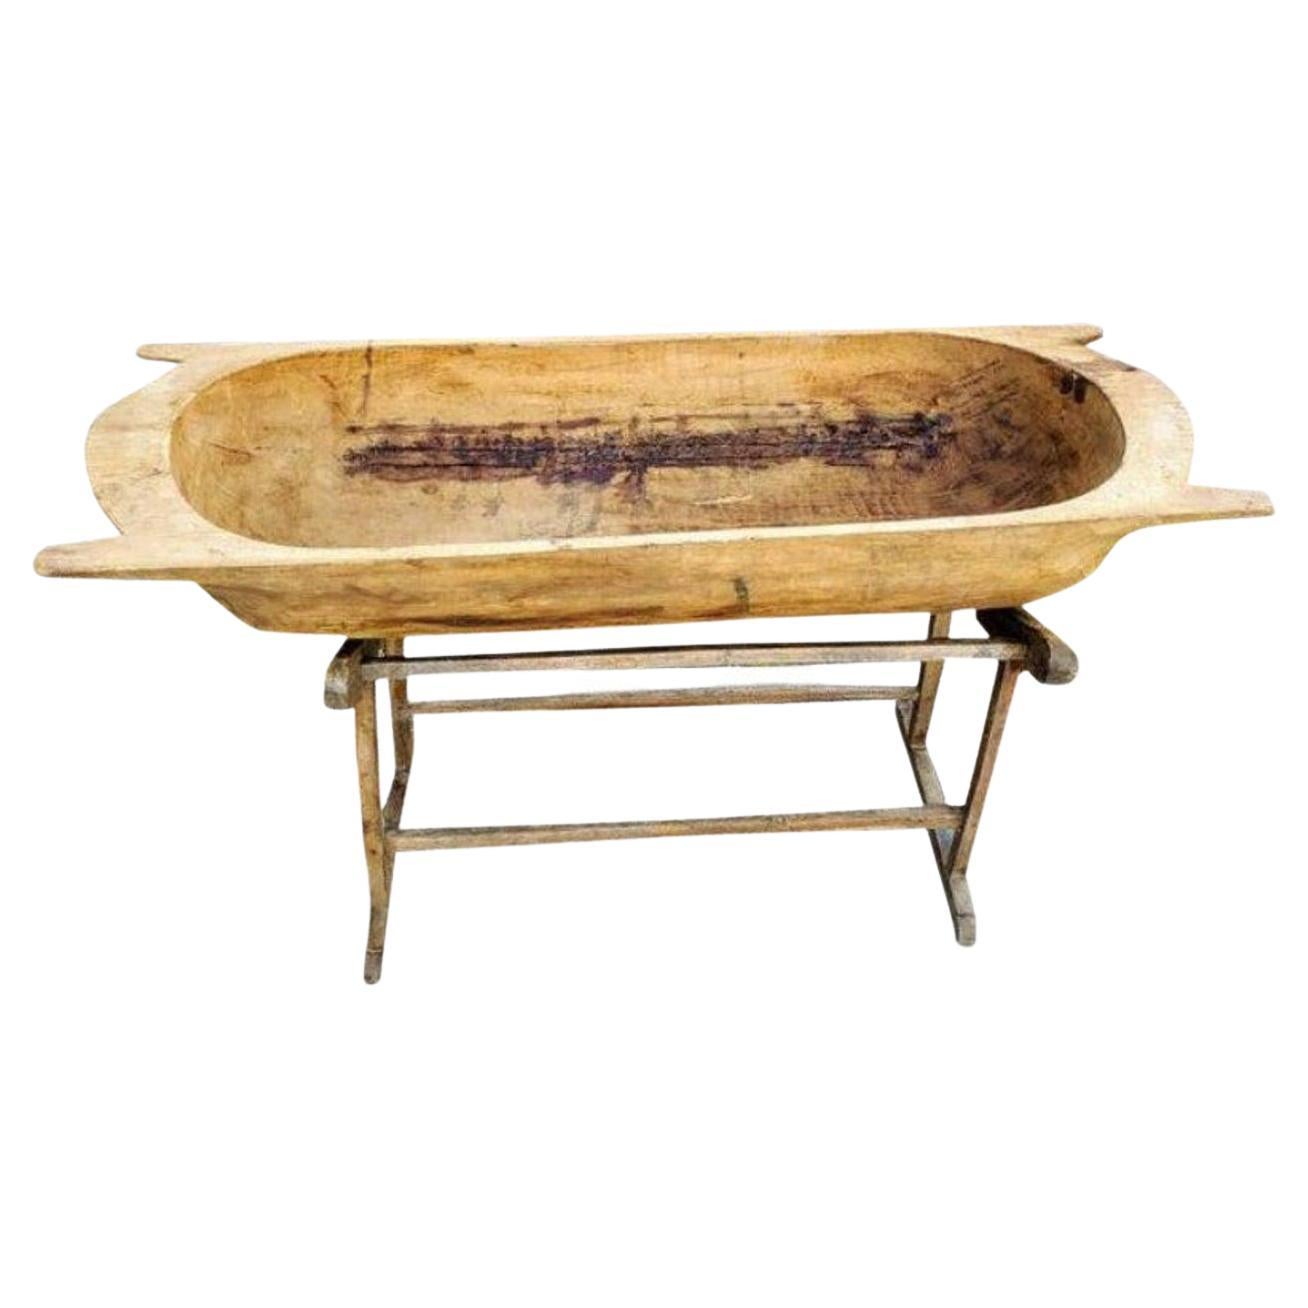 Rustic Wooden Dough Trough on Stand